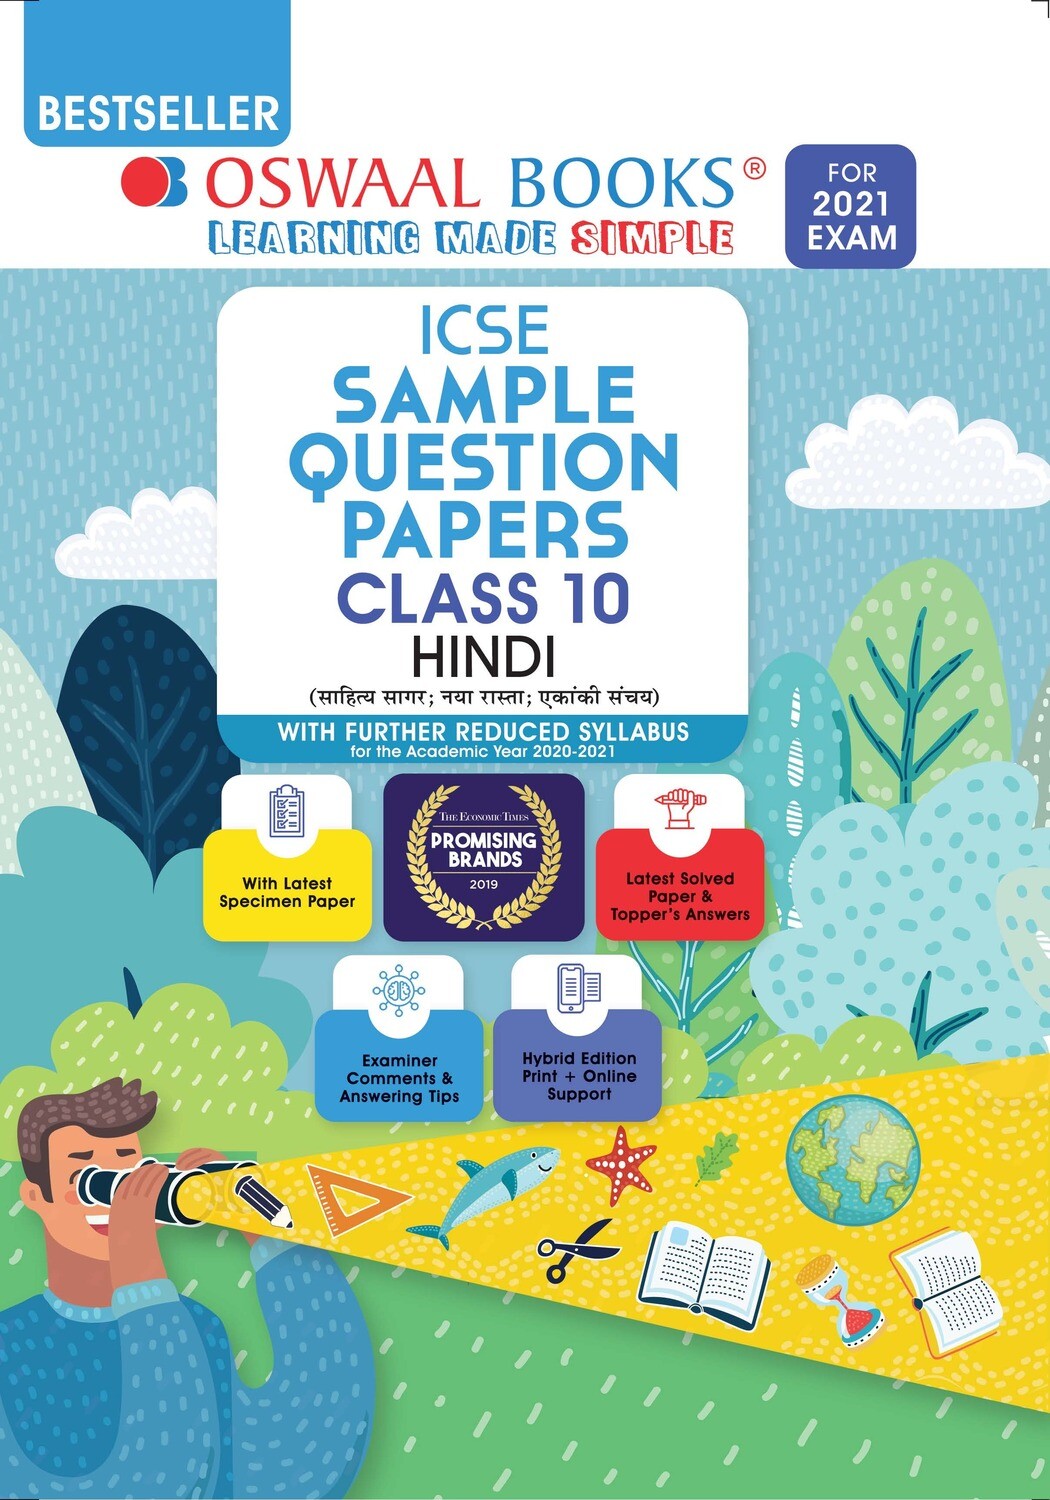 Buy e-book: Oswaal ICSE Sample Question Papers Class 10 Hindi (Reduced Syllabus for 2021 Exam): 9789354233067